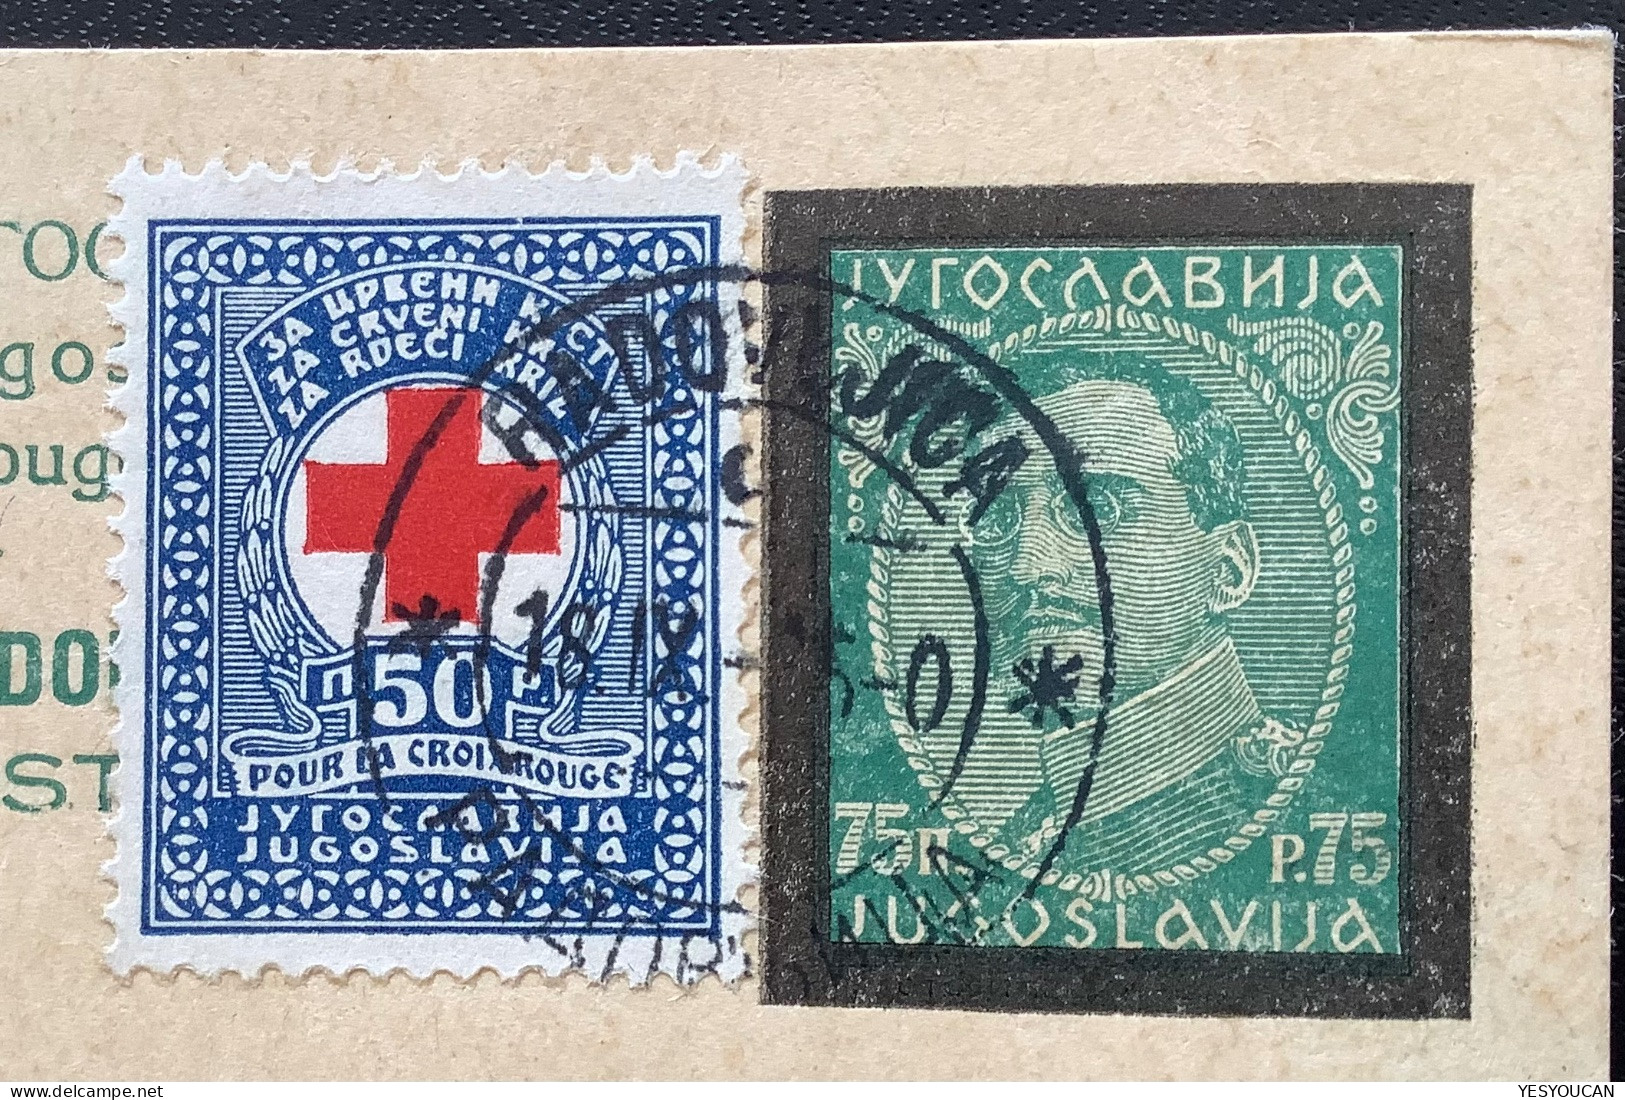 Yugoslavia 1935 Croix Rouge 50p Postal Tax Stamp On Postal Stationery Card 75p With Mourning Overprint From RODOVIJICA - Entiers Postaux